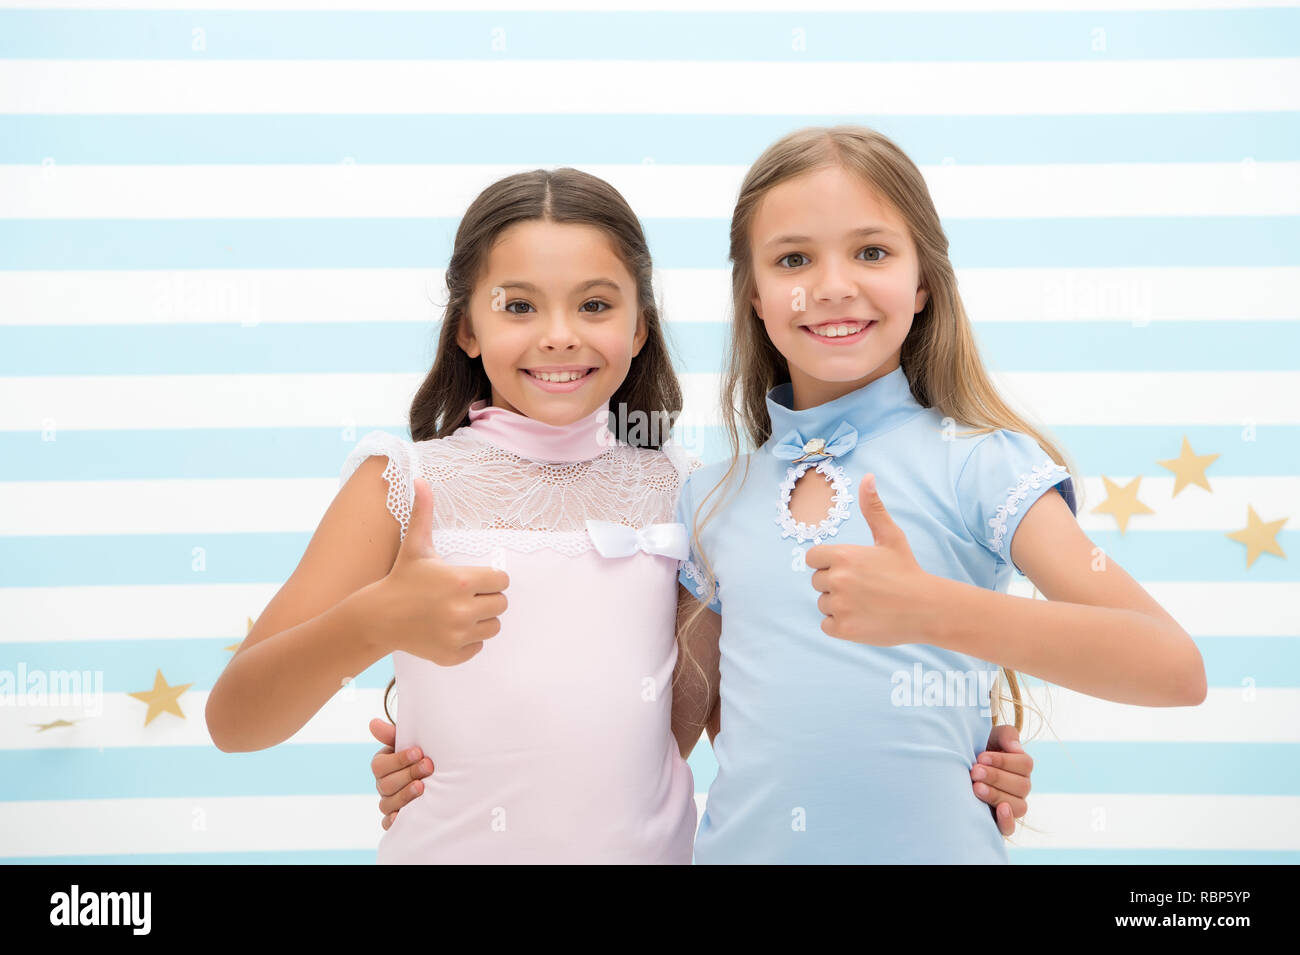 Girls smiling happy faces hug each other and show thumbs up gesture. Girls children best friends hugs. Happy childhood concept. Kids schoolgirls preteens happy together. Friendship from childhood. Stock Photo